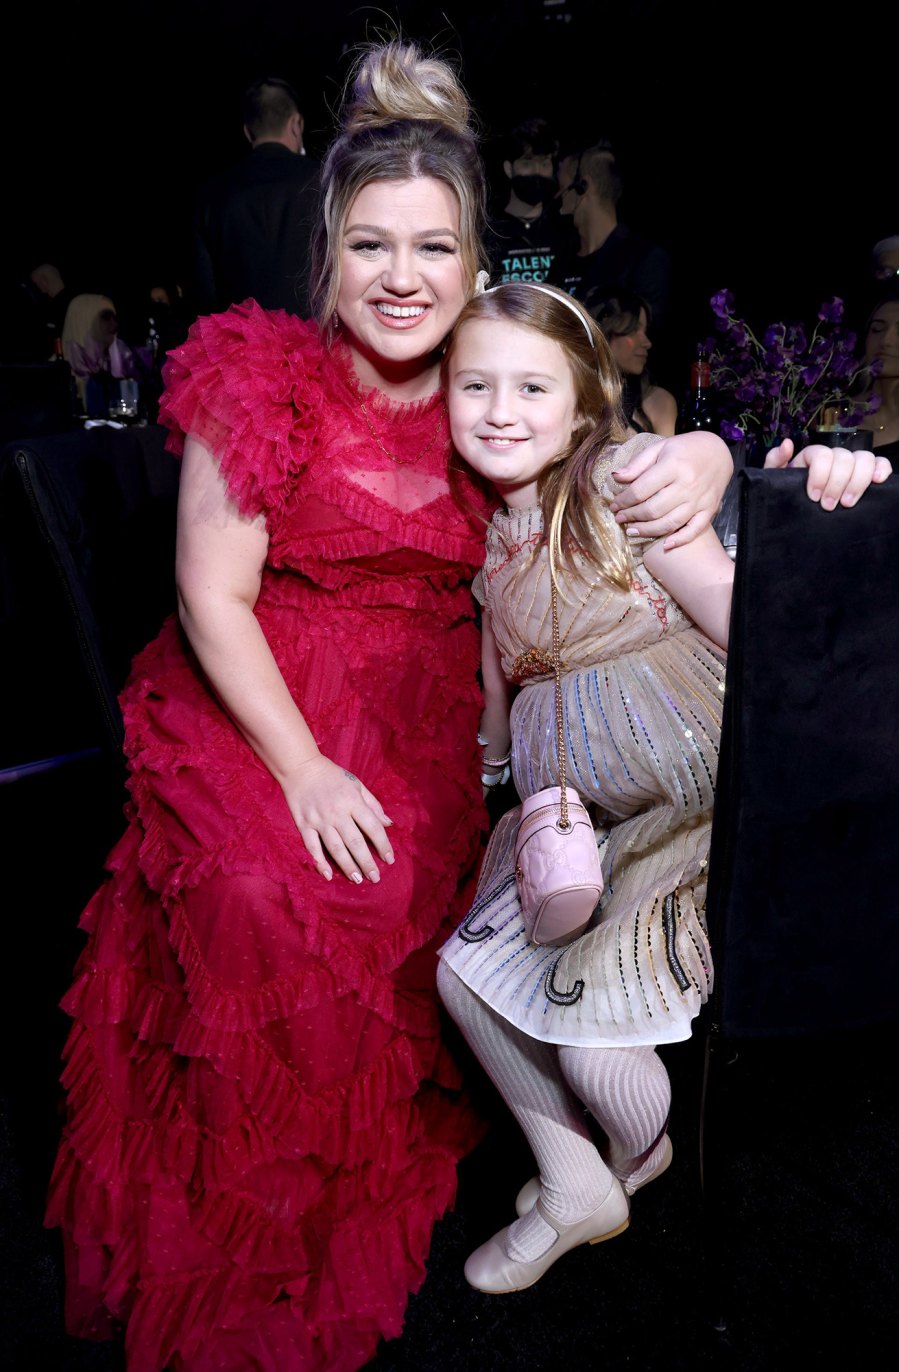 Kelly Clarkson’s Daughter Is Featured on New Song ‘You Don't Make Me Cry’